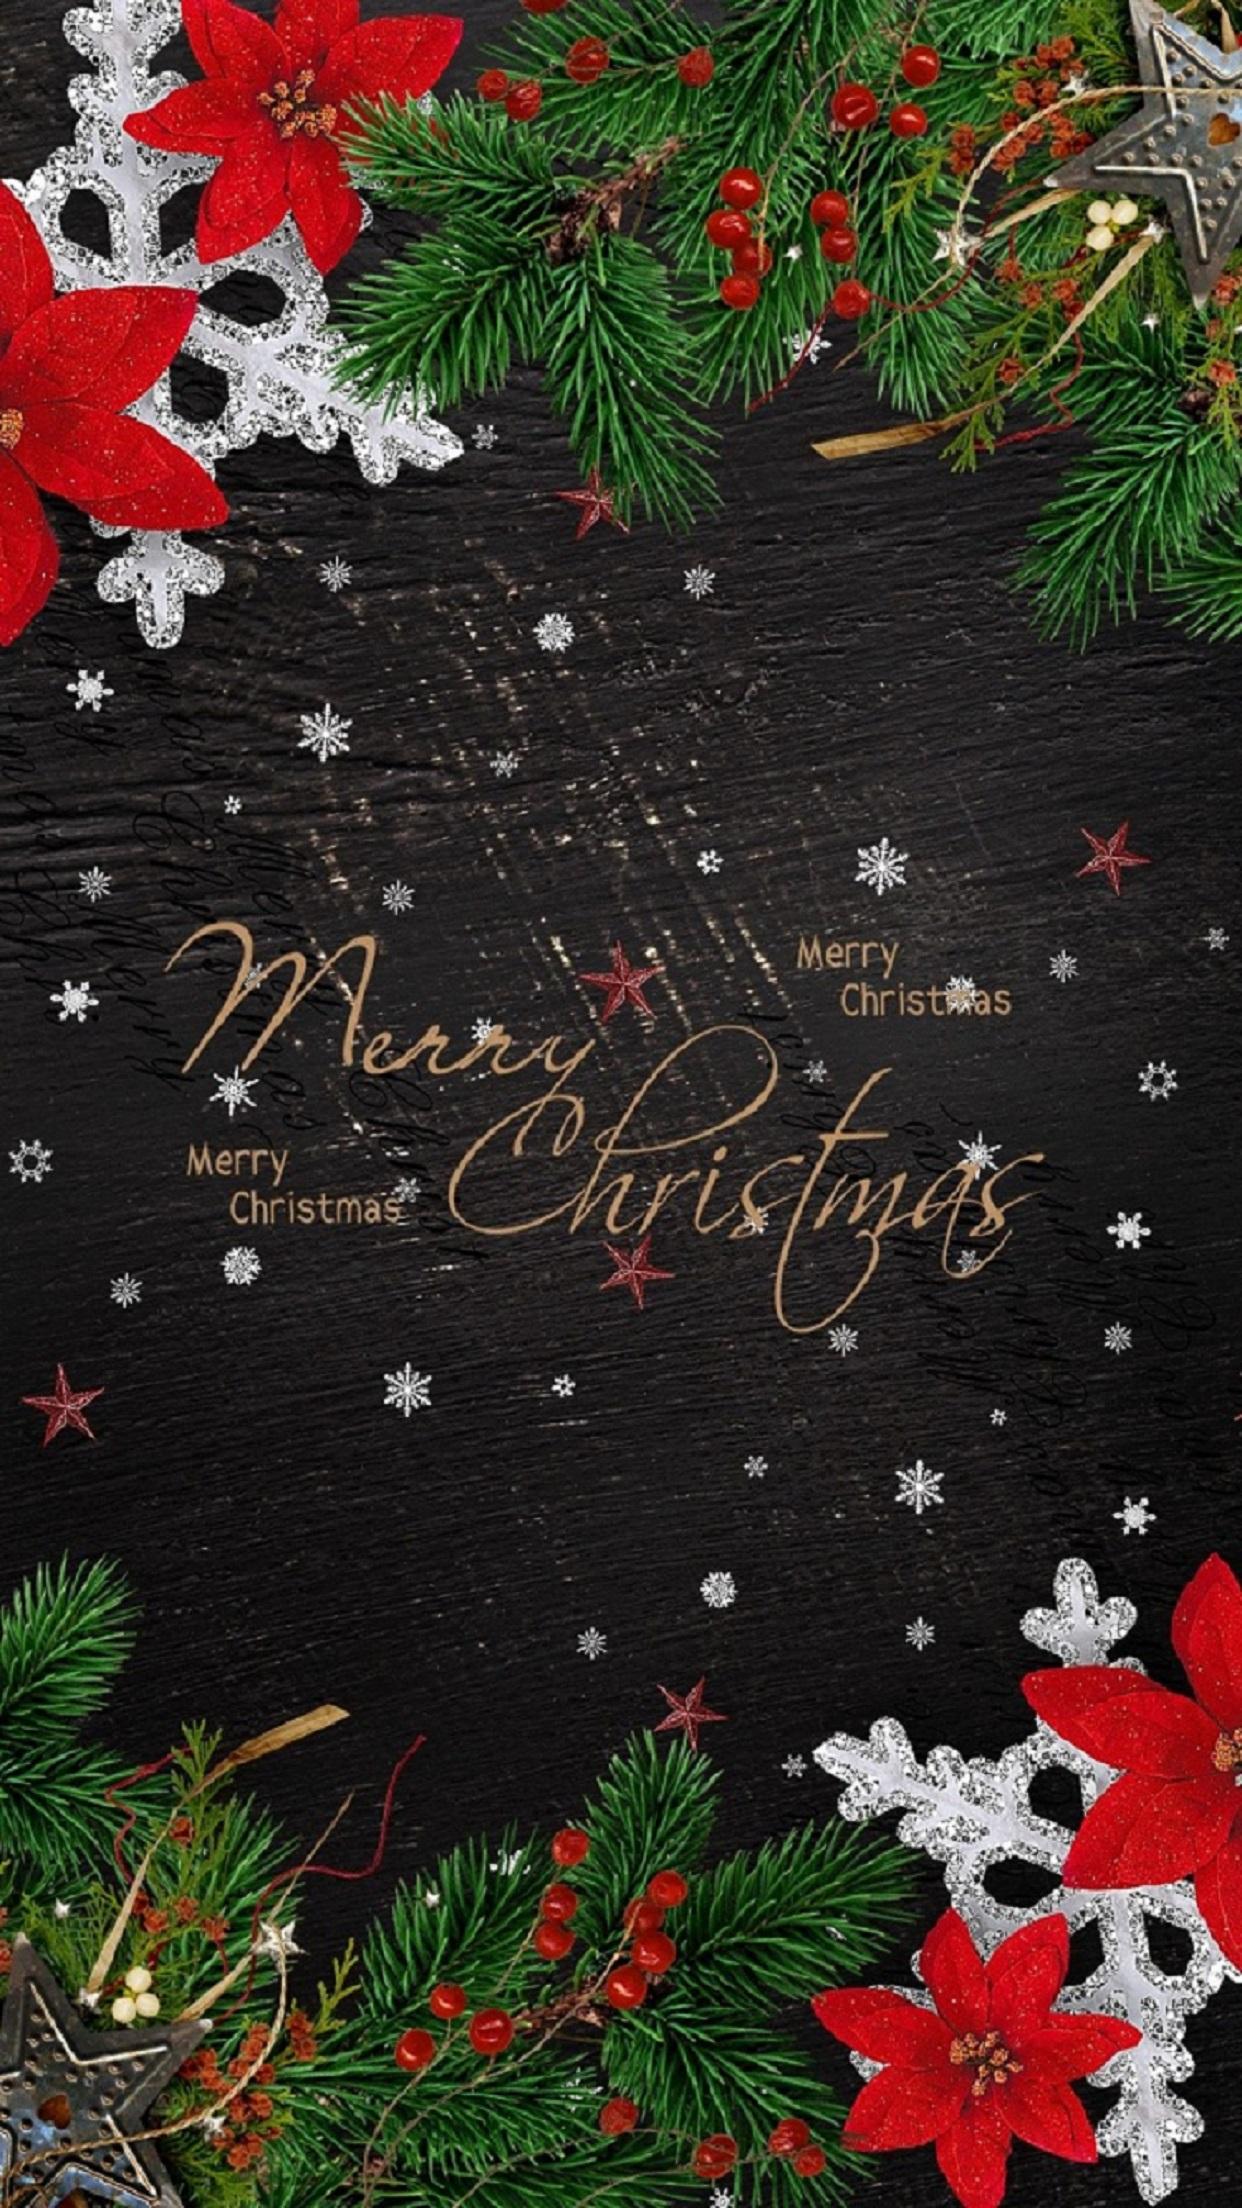 Free Merry Christmas Wallpaper HD Image for iPhone